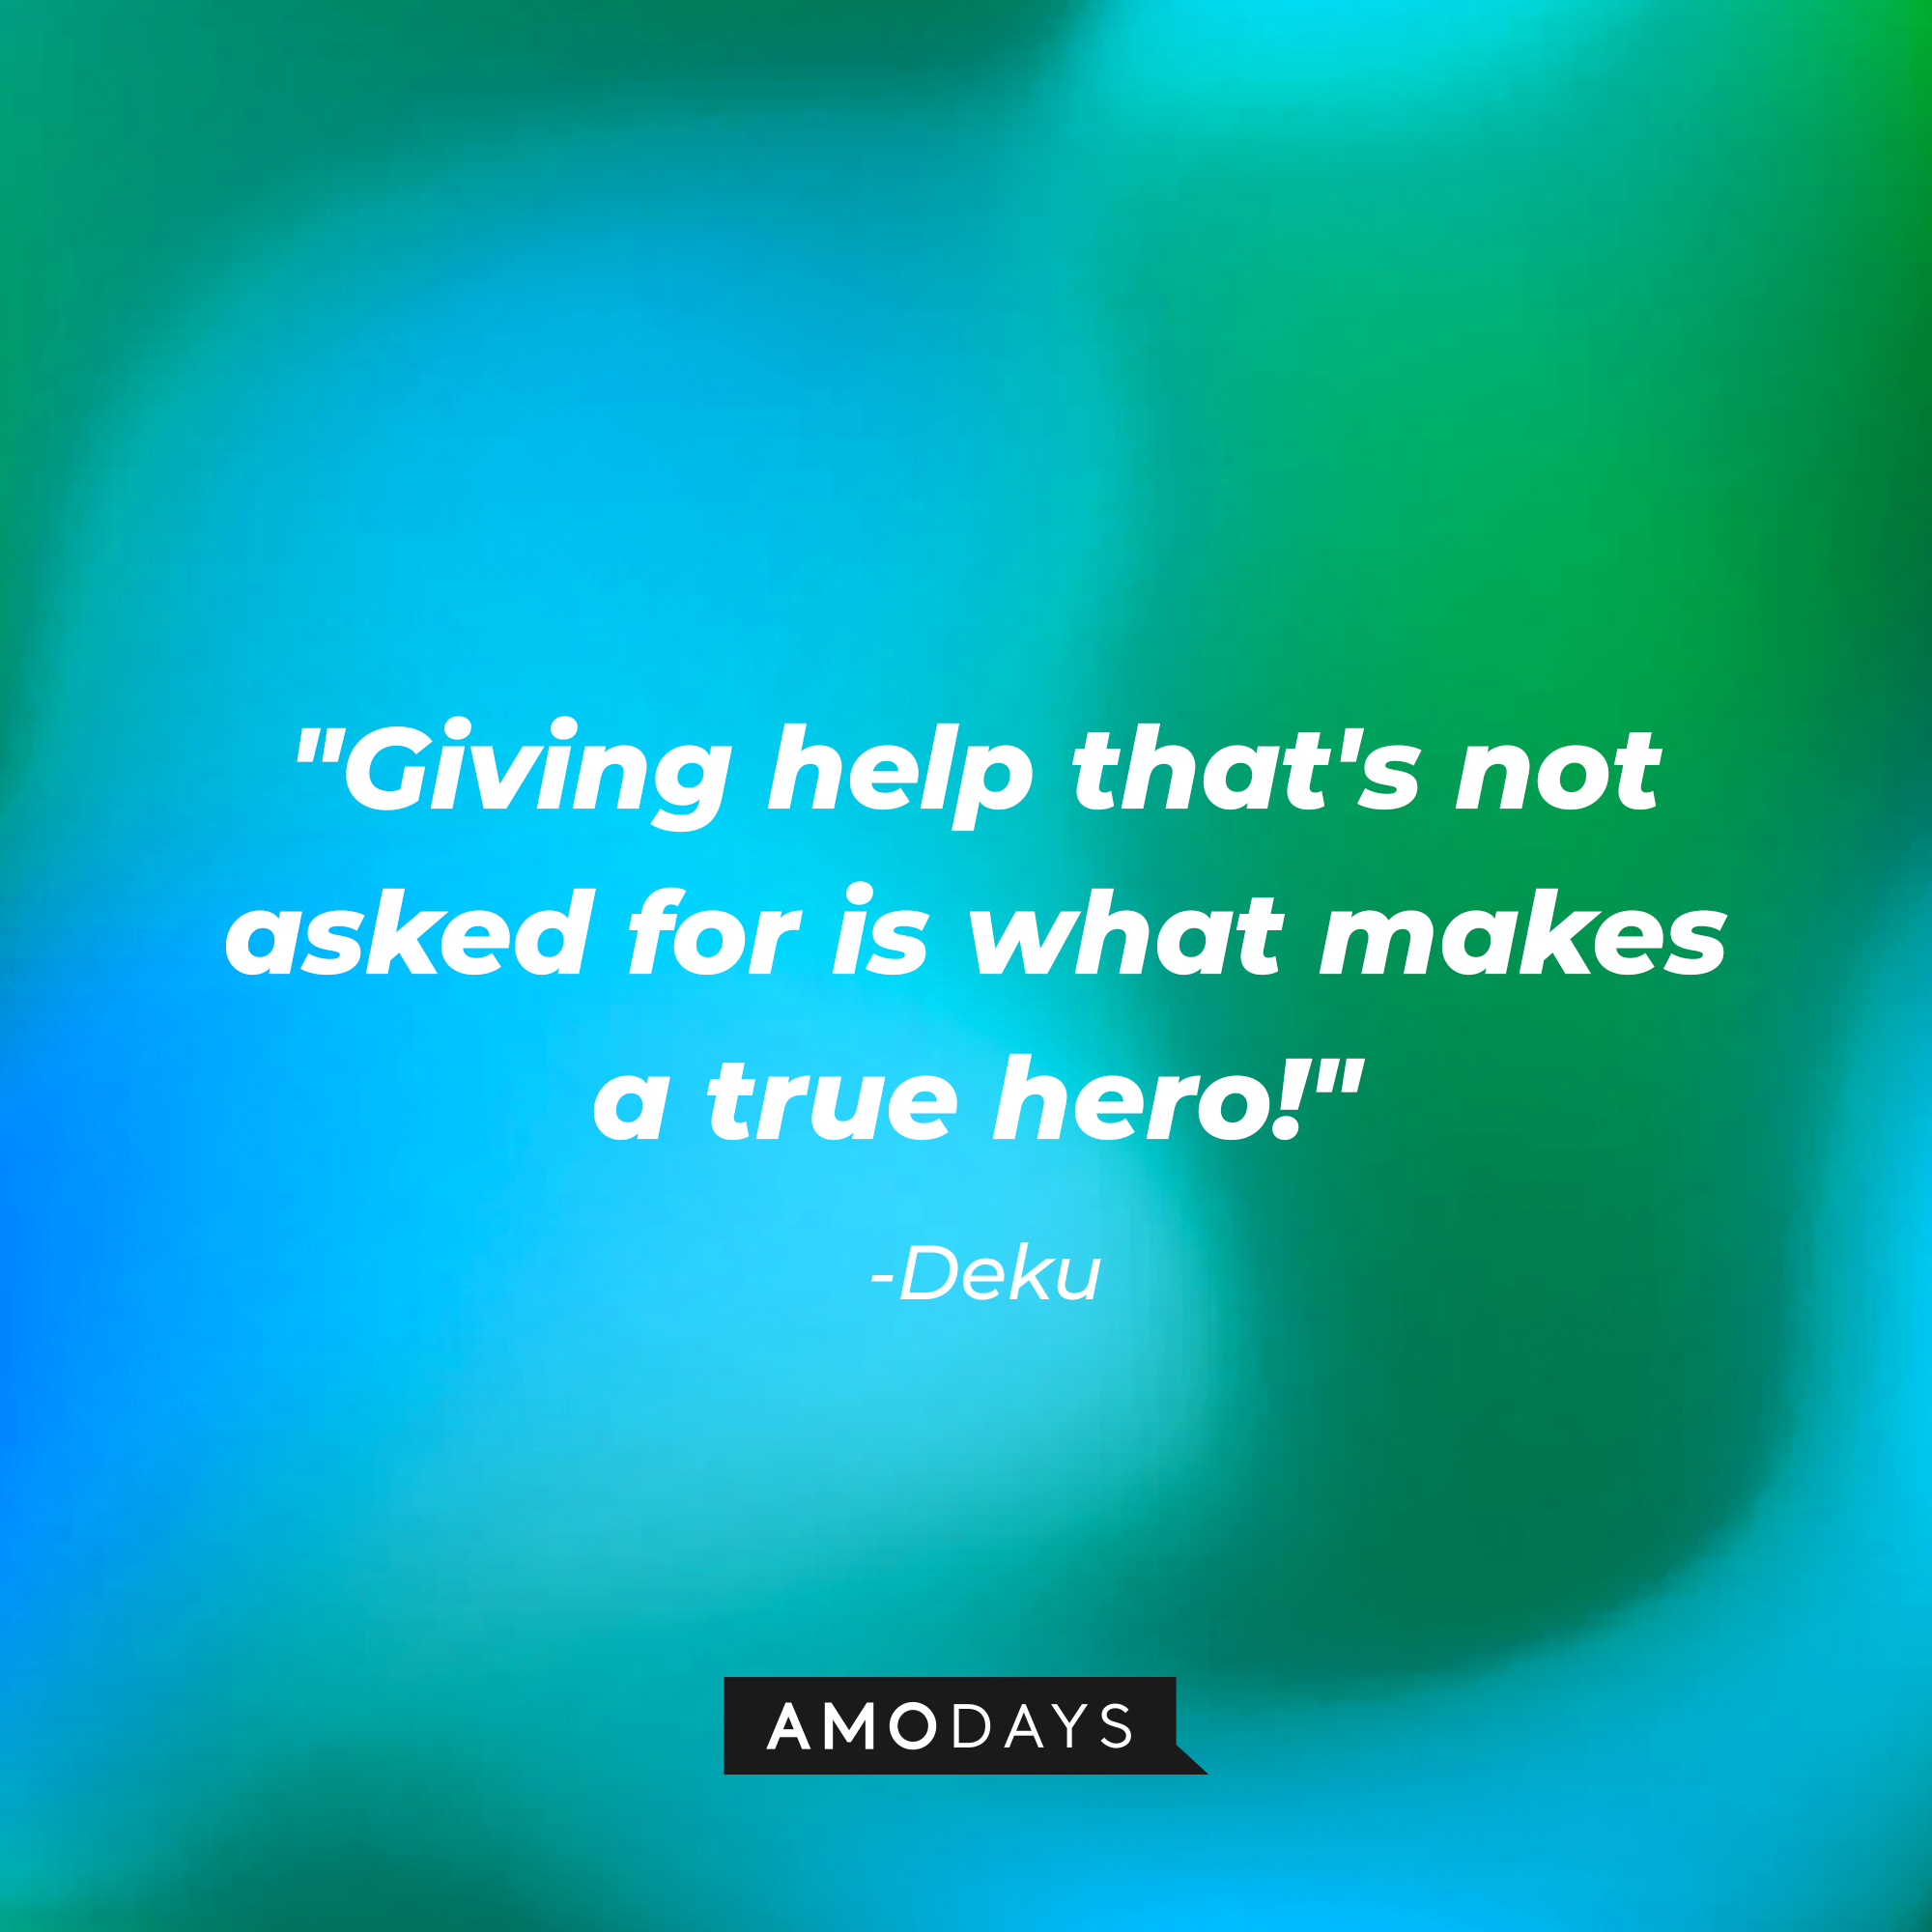 Deku's quote: "Giving help that's not asked for is what makes a true hero!" | Source: AmoDays